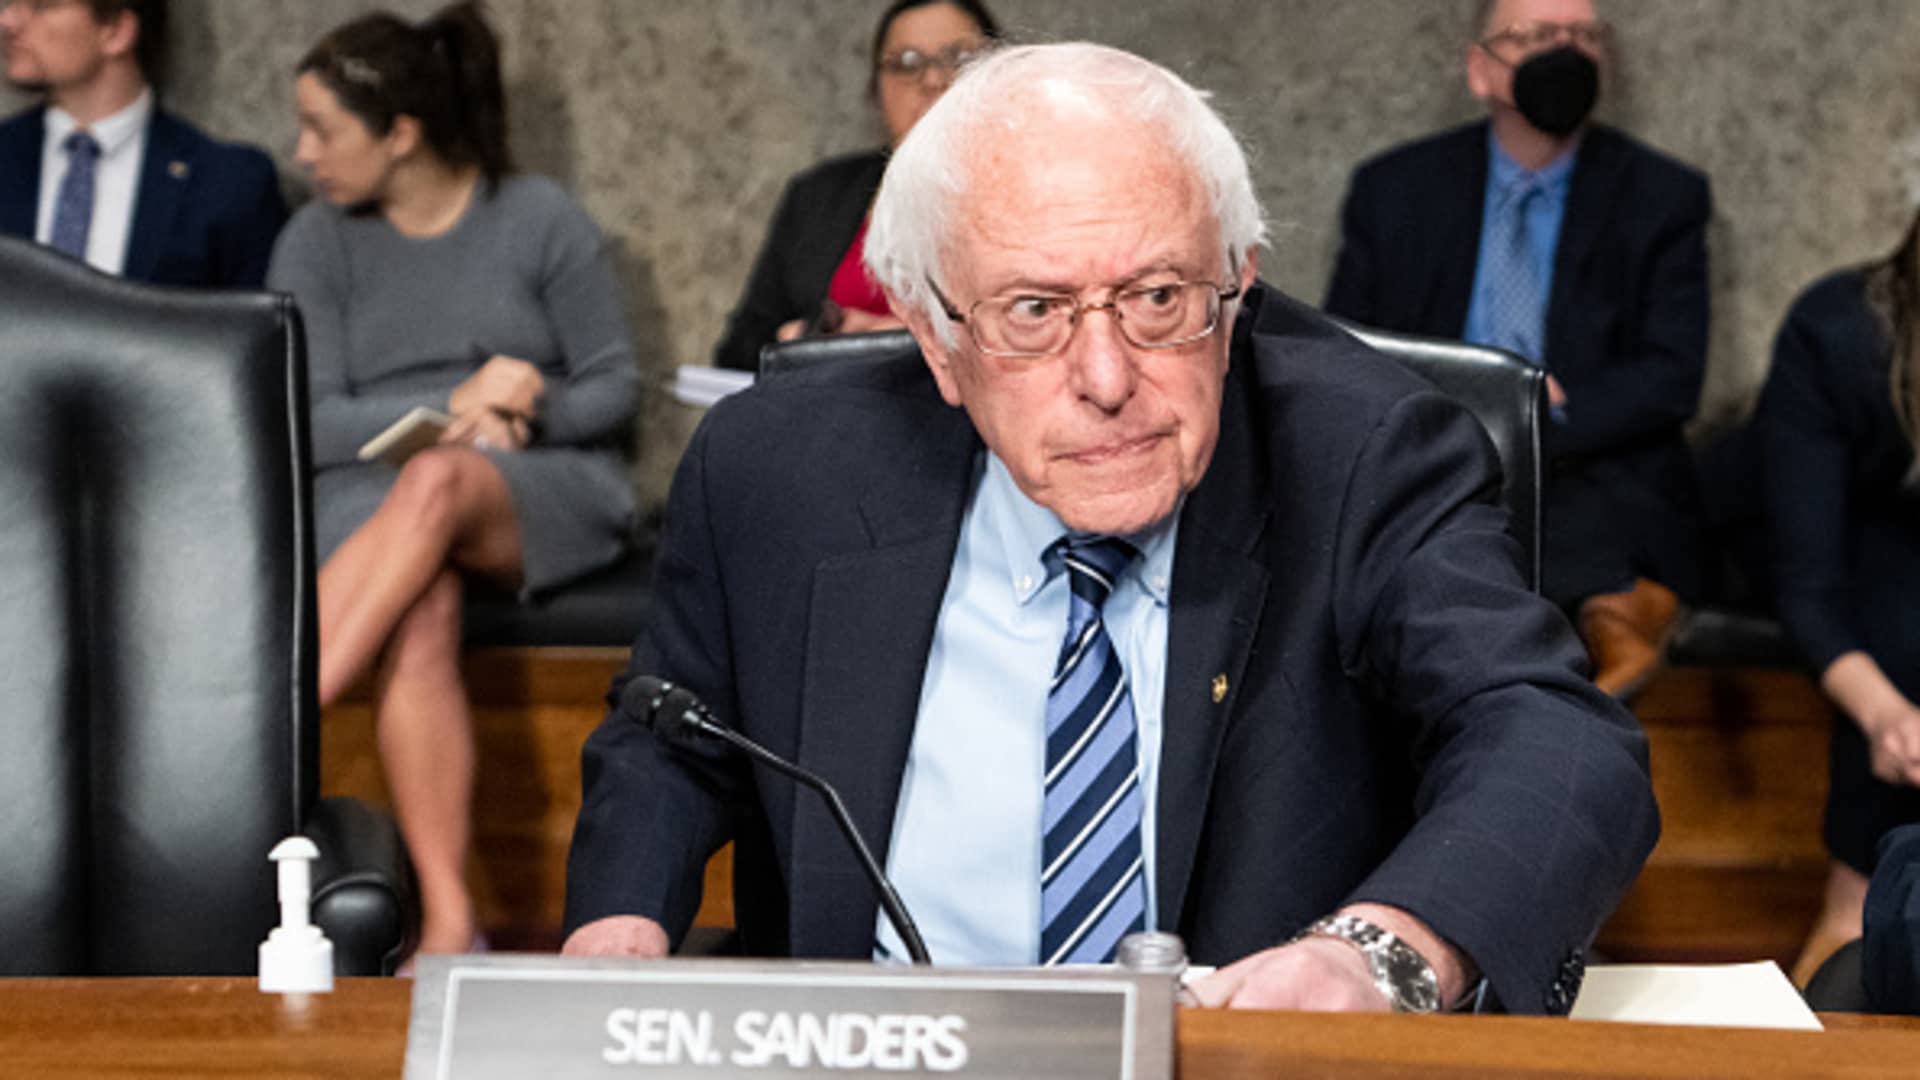 Chairman Sen. Bernie Sanders, I-Vt., prepares to gavel to order the Senate Health, Education, Labor and Pensions Committee hearing on No Company is Above the Law: The Need to End Illegal Union Busting at Starbucks in the Dirksen Senate Office Building on Wednesday, March 29, 2023.